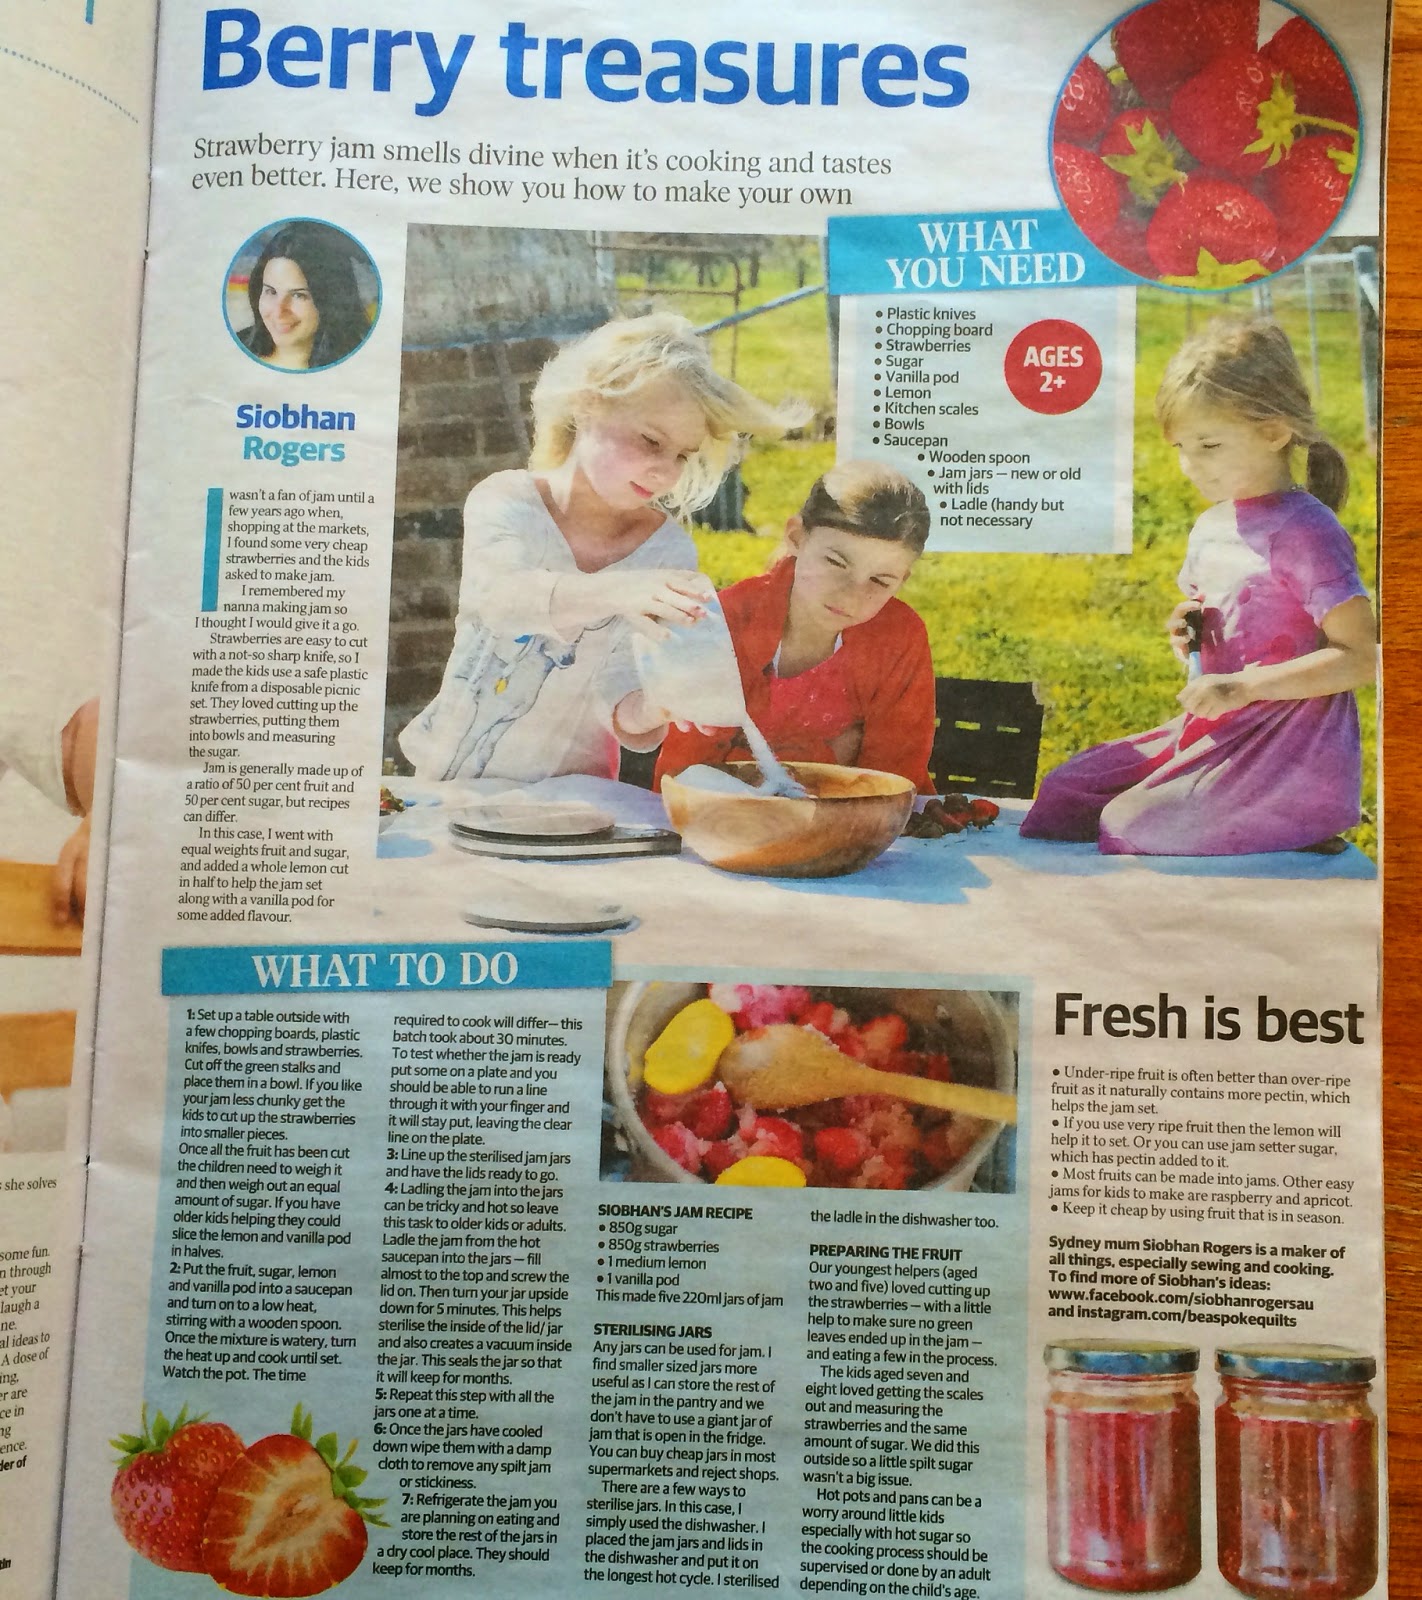 A story I did for The Daily Tele